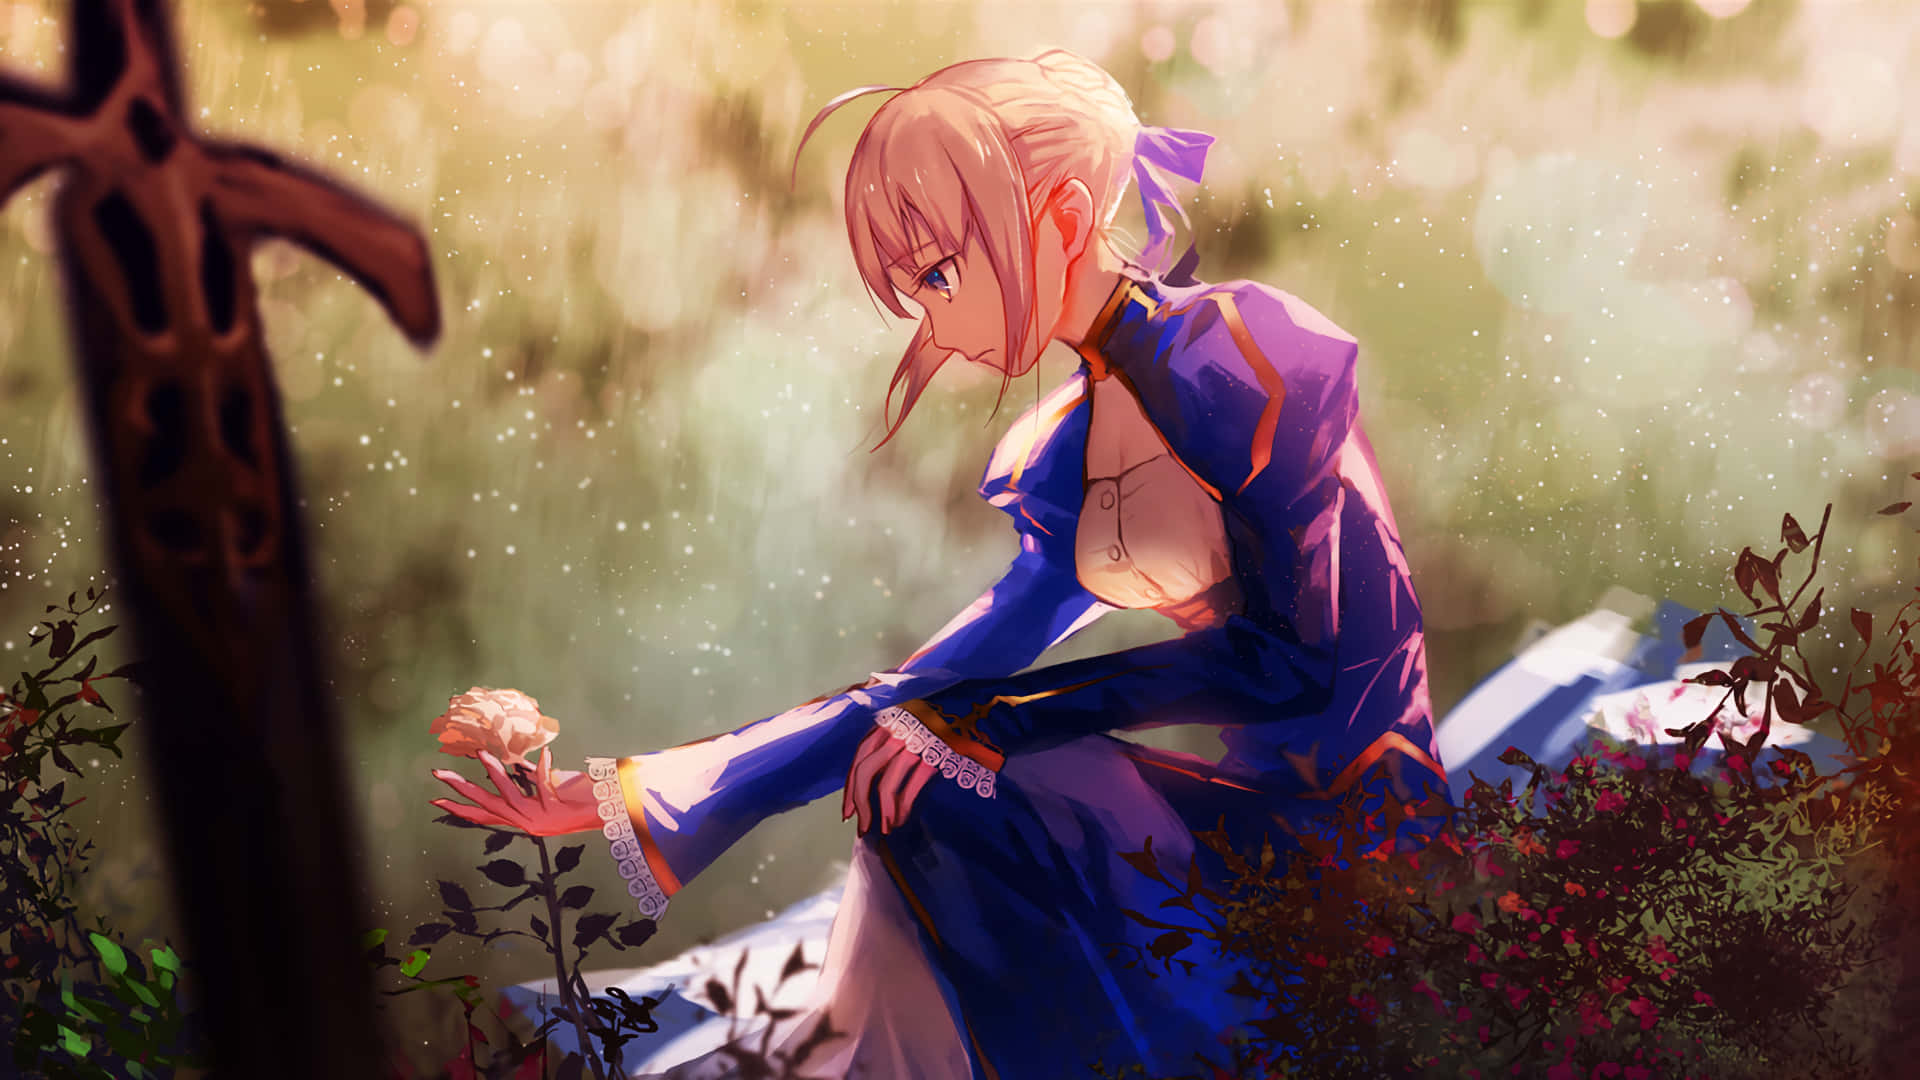 Saber Fate Stay Night Holding Flower Wallpaper